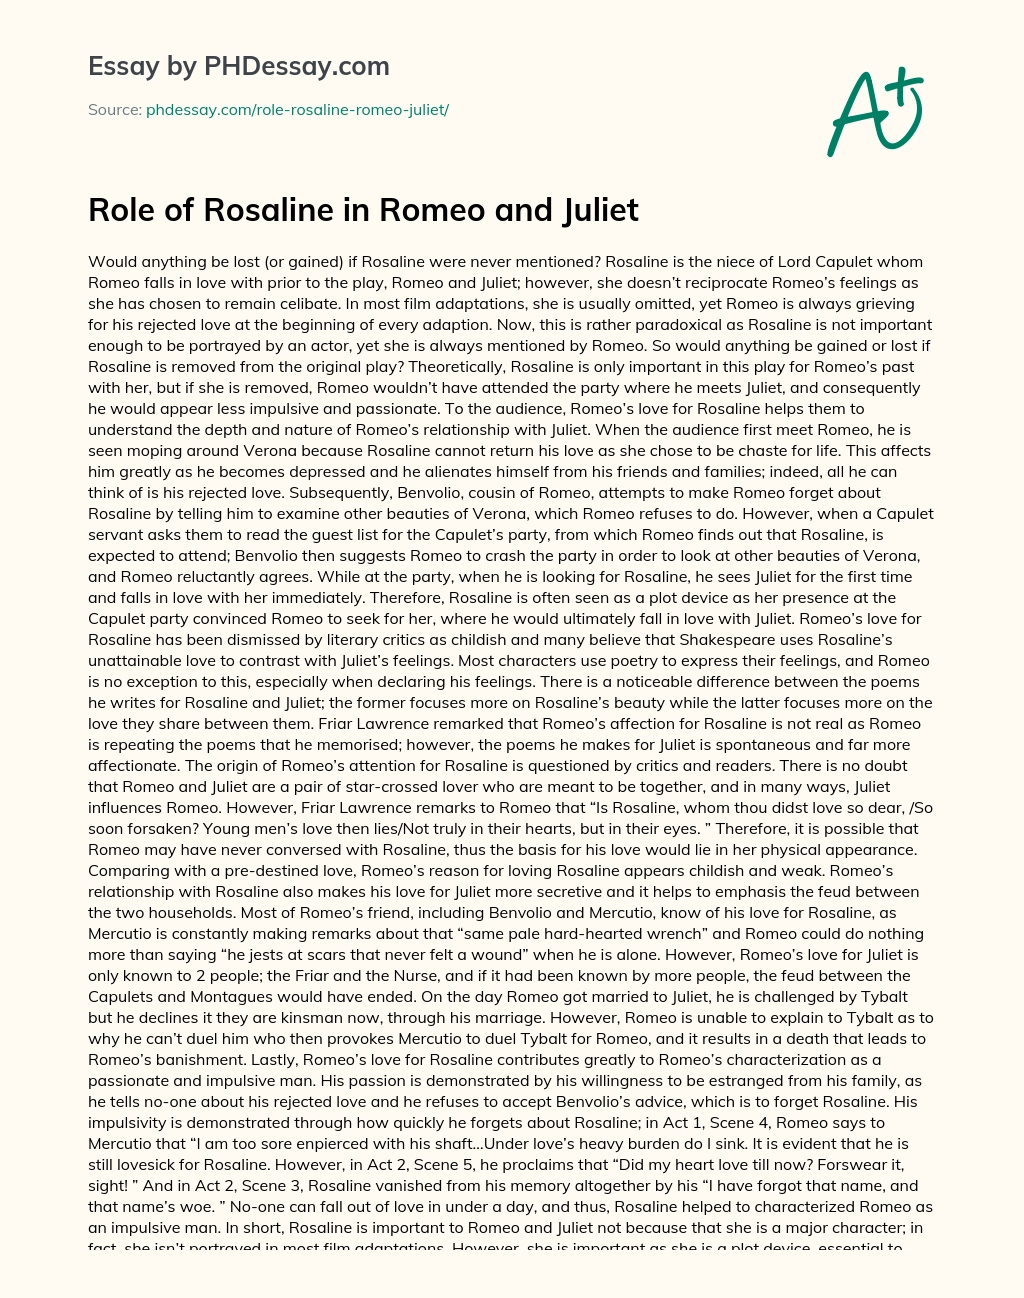 Role of Rosaline in Romeo and Juliet essay